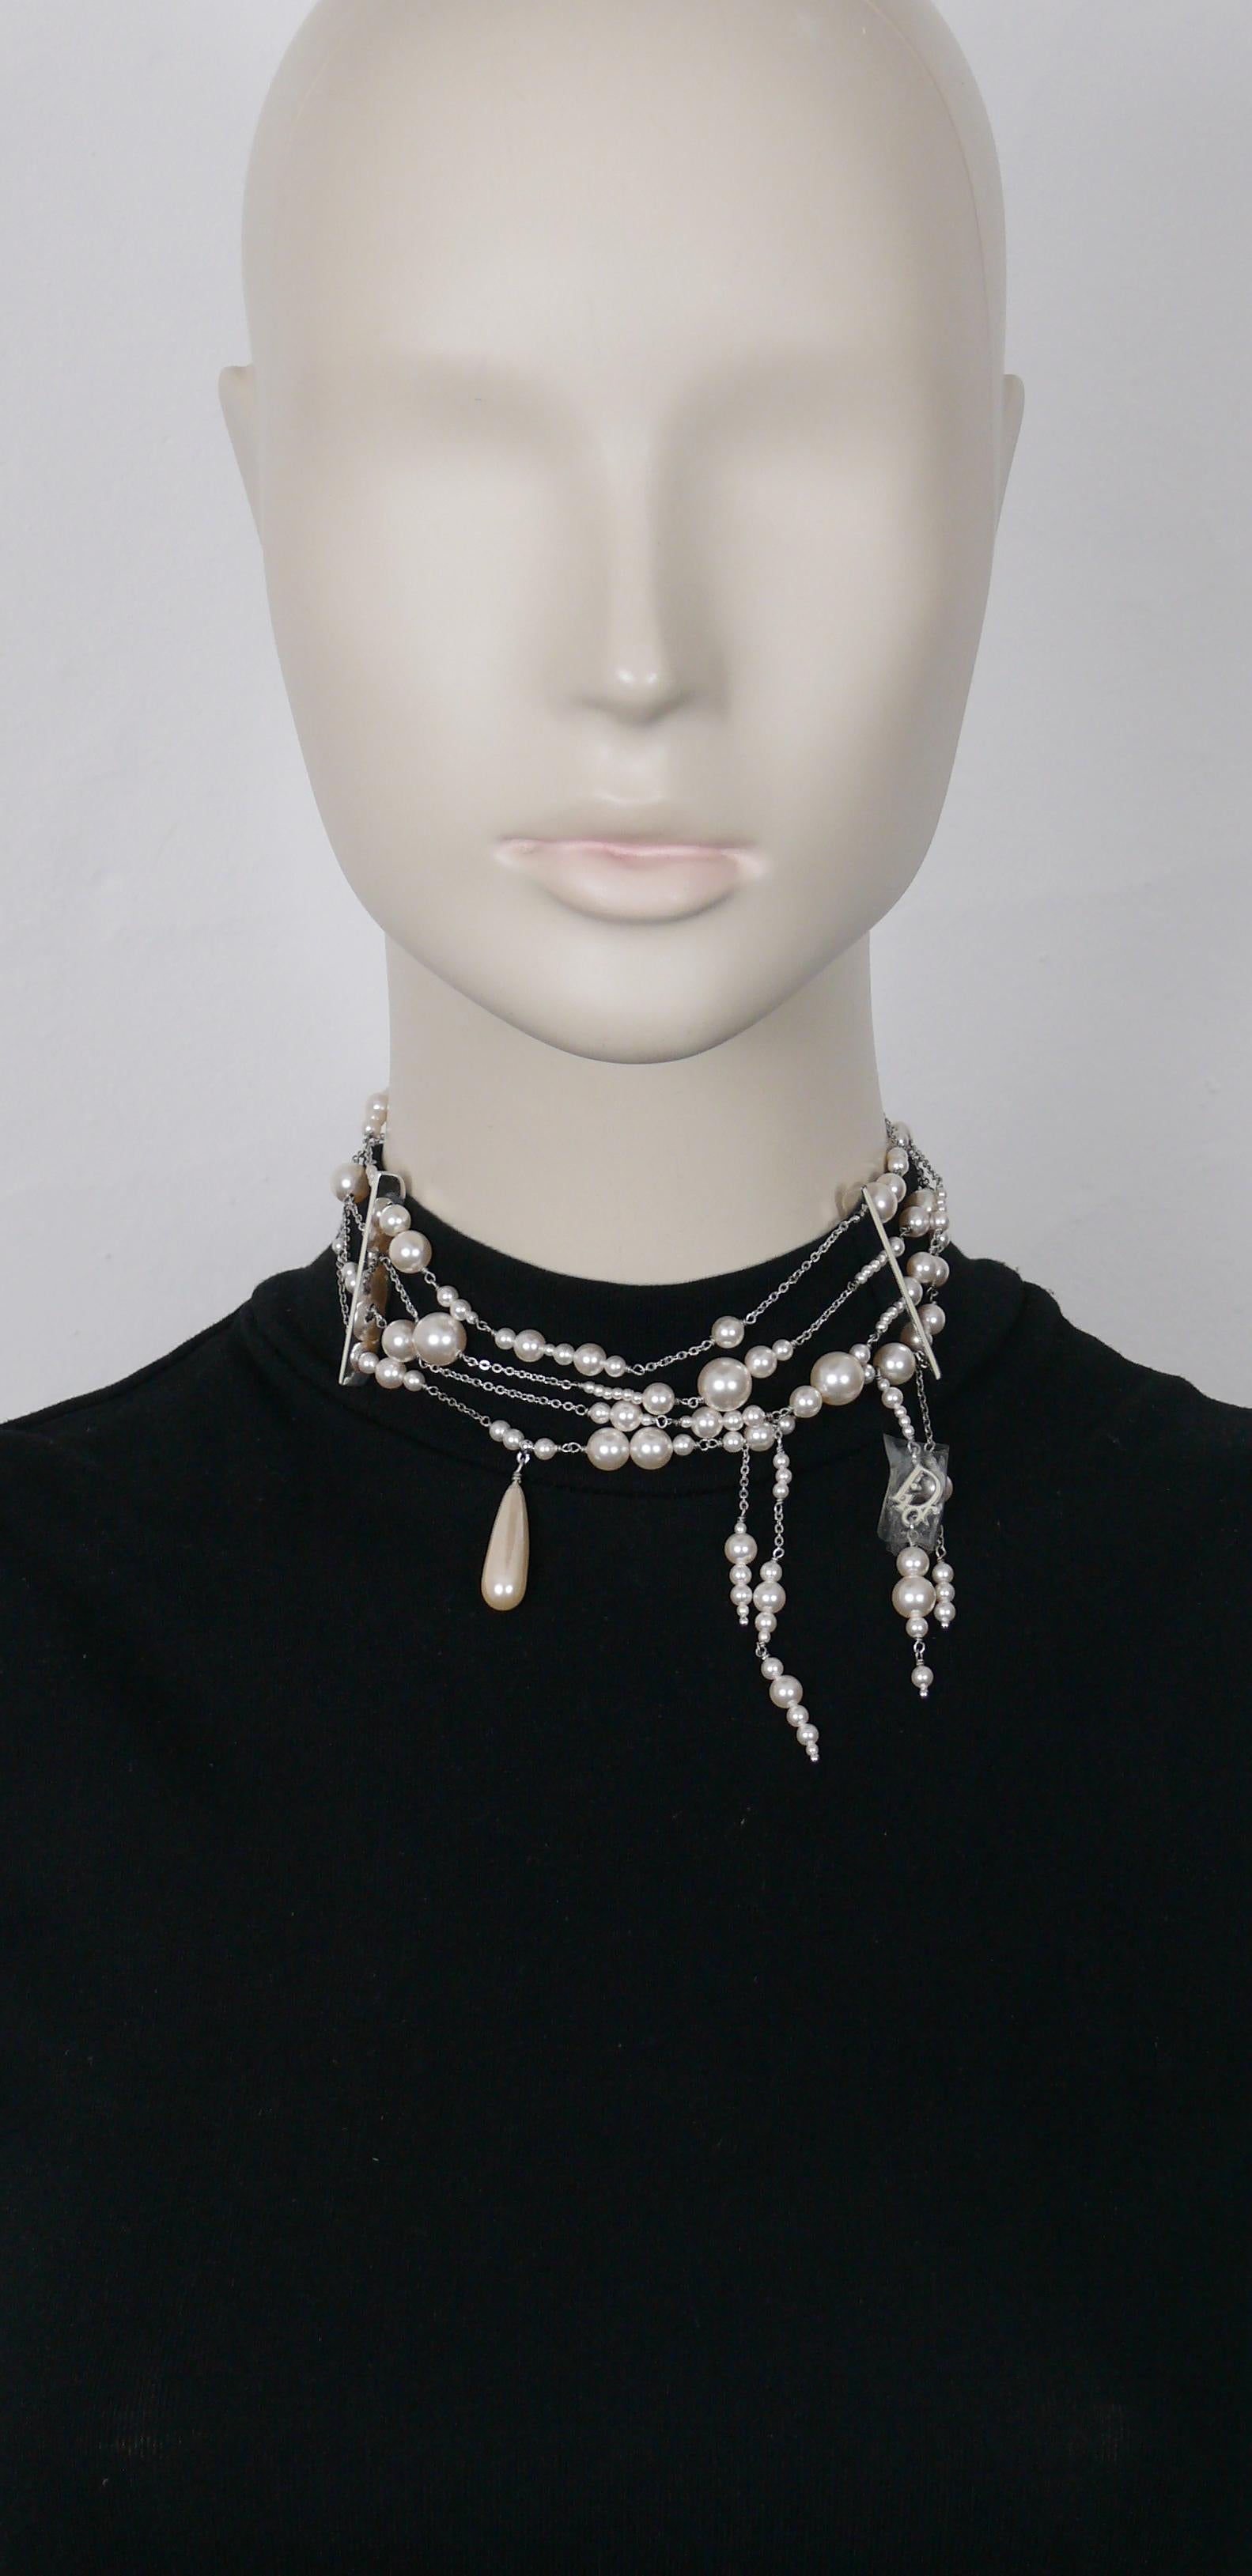 CHRISTIAN DIOR by JOHN GALLIANO choker necklace featuring four rows of chains alterning with graduated faux pearls, cascading faux pearls, drop and DIOR logo charm.

Silver tone metal hardware.

Double hook closure.
Adustable length.

Embossed